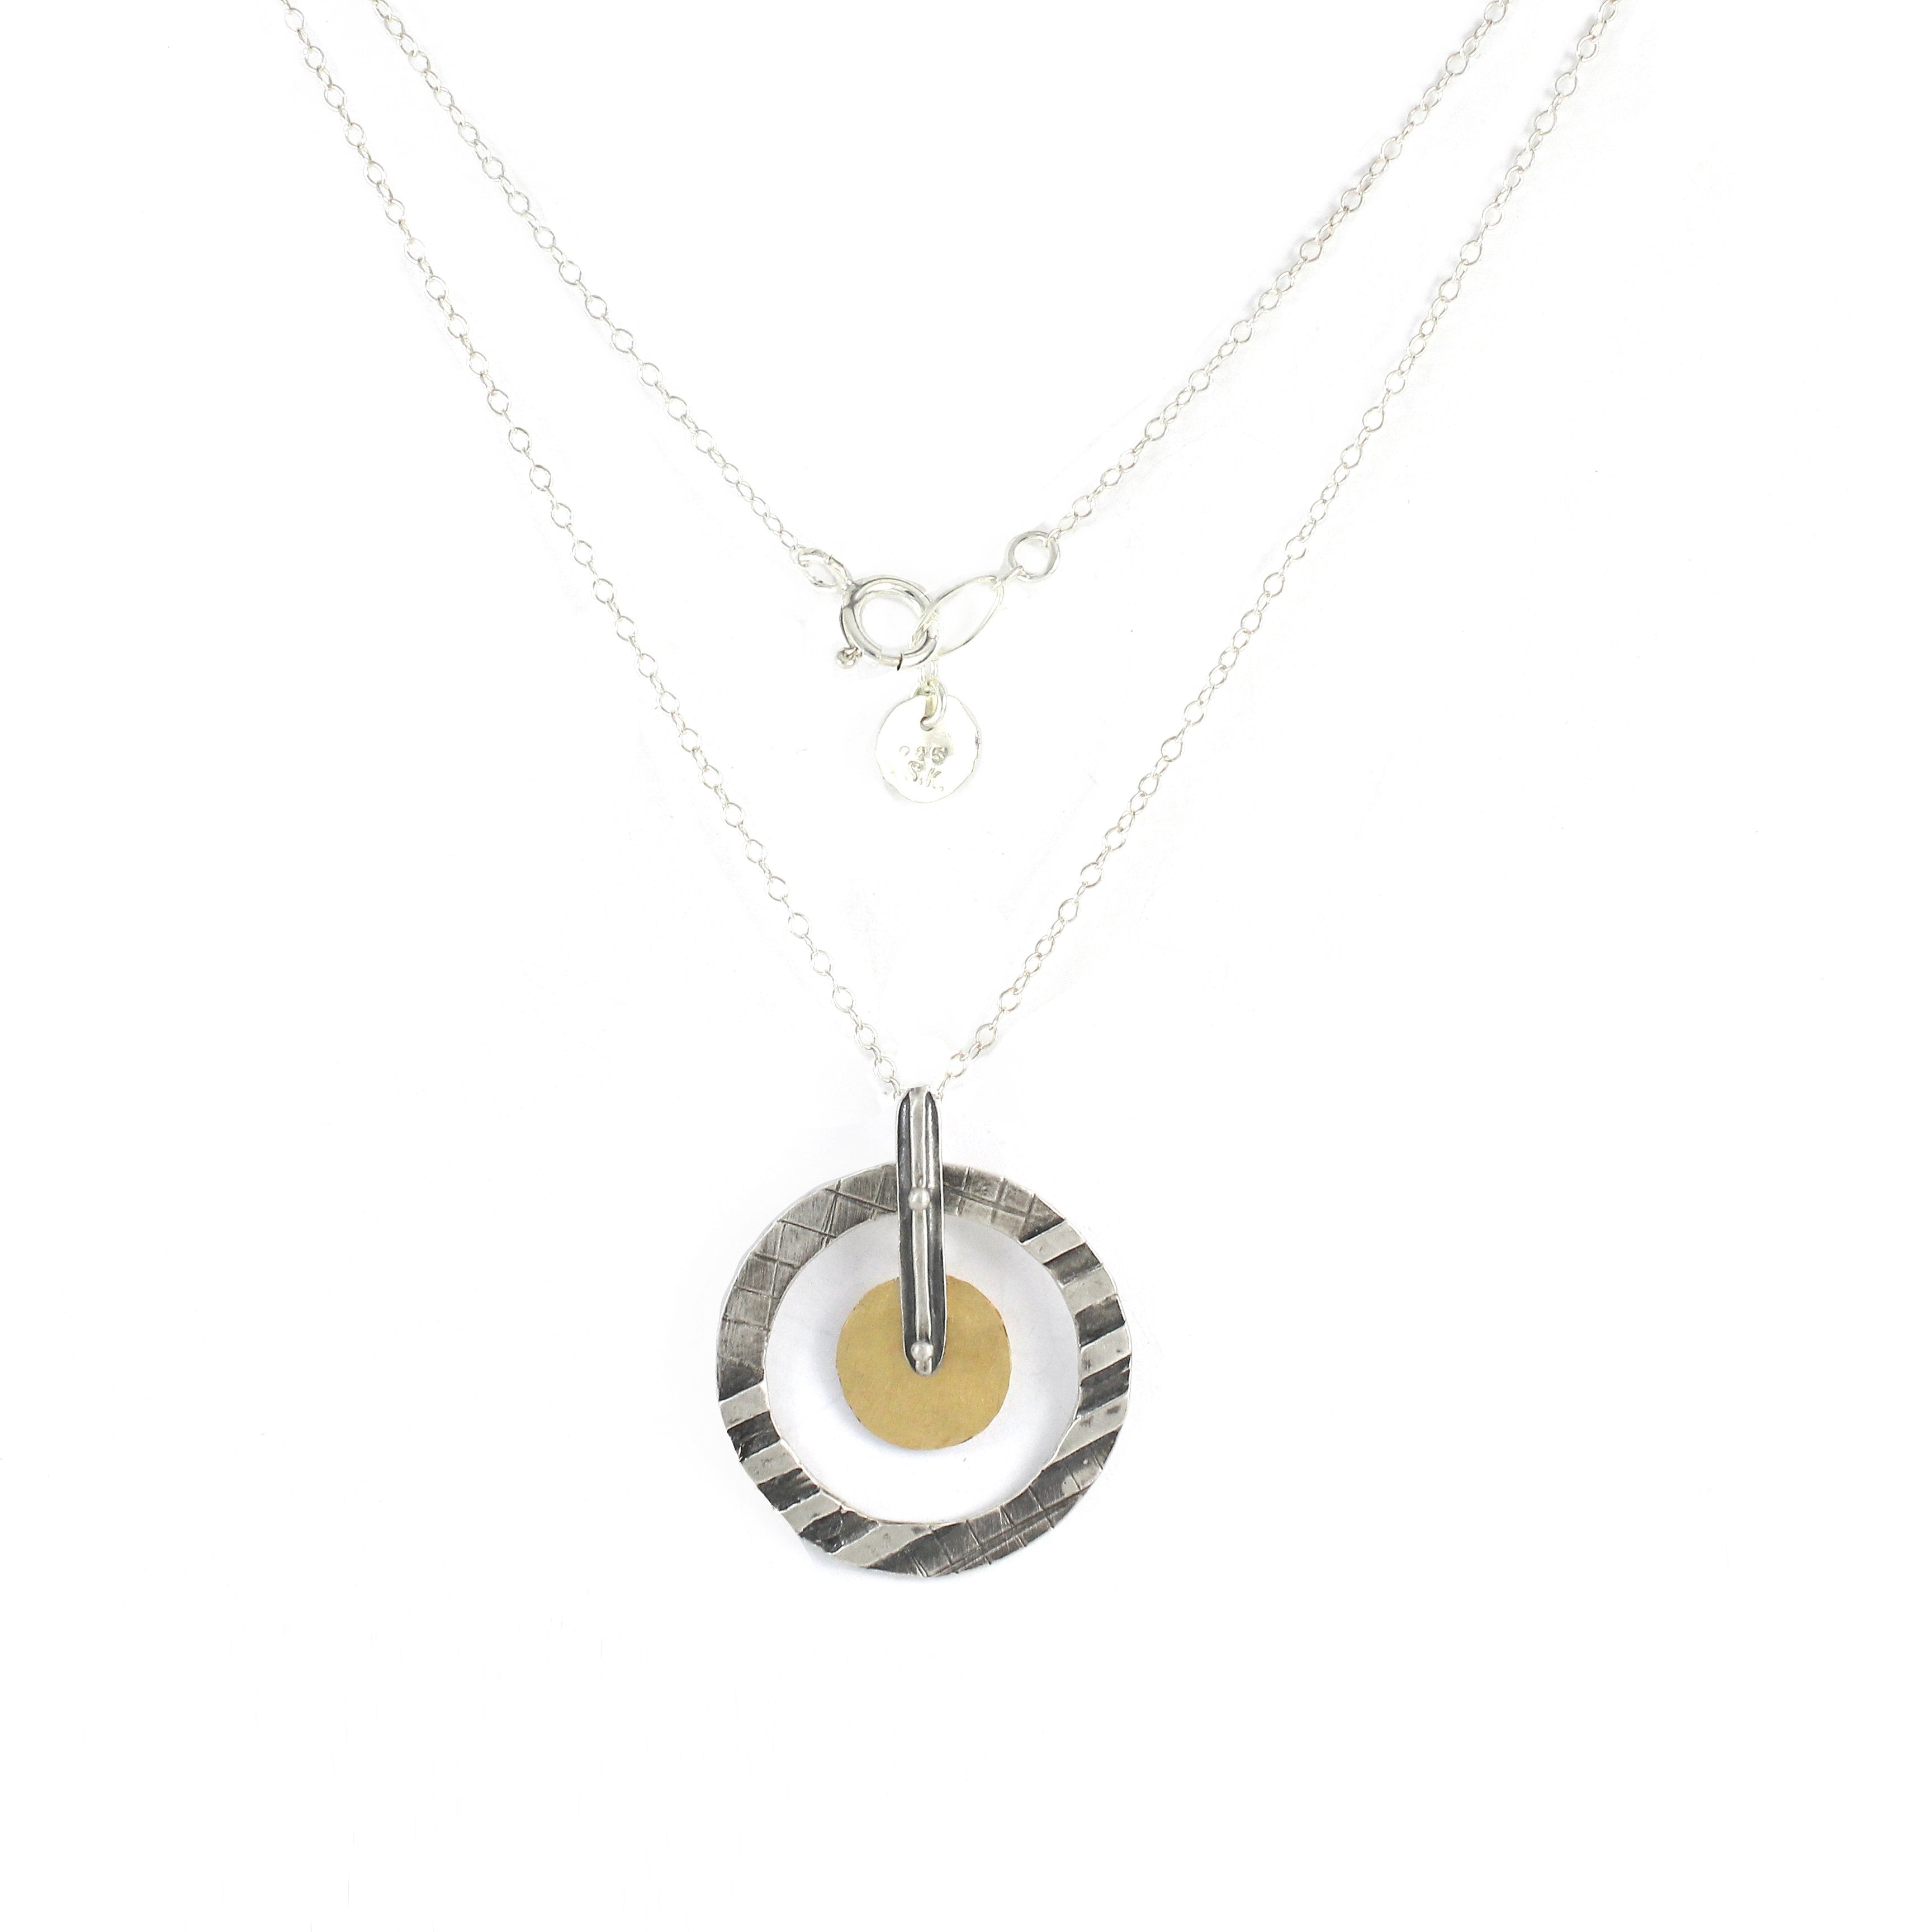 Western Moroccan Style Silver & Goldfield Medium Pendant Necklace - Shulamit Kanter